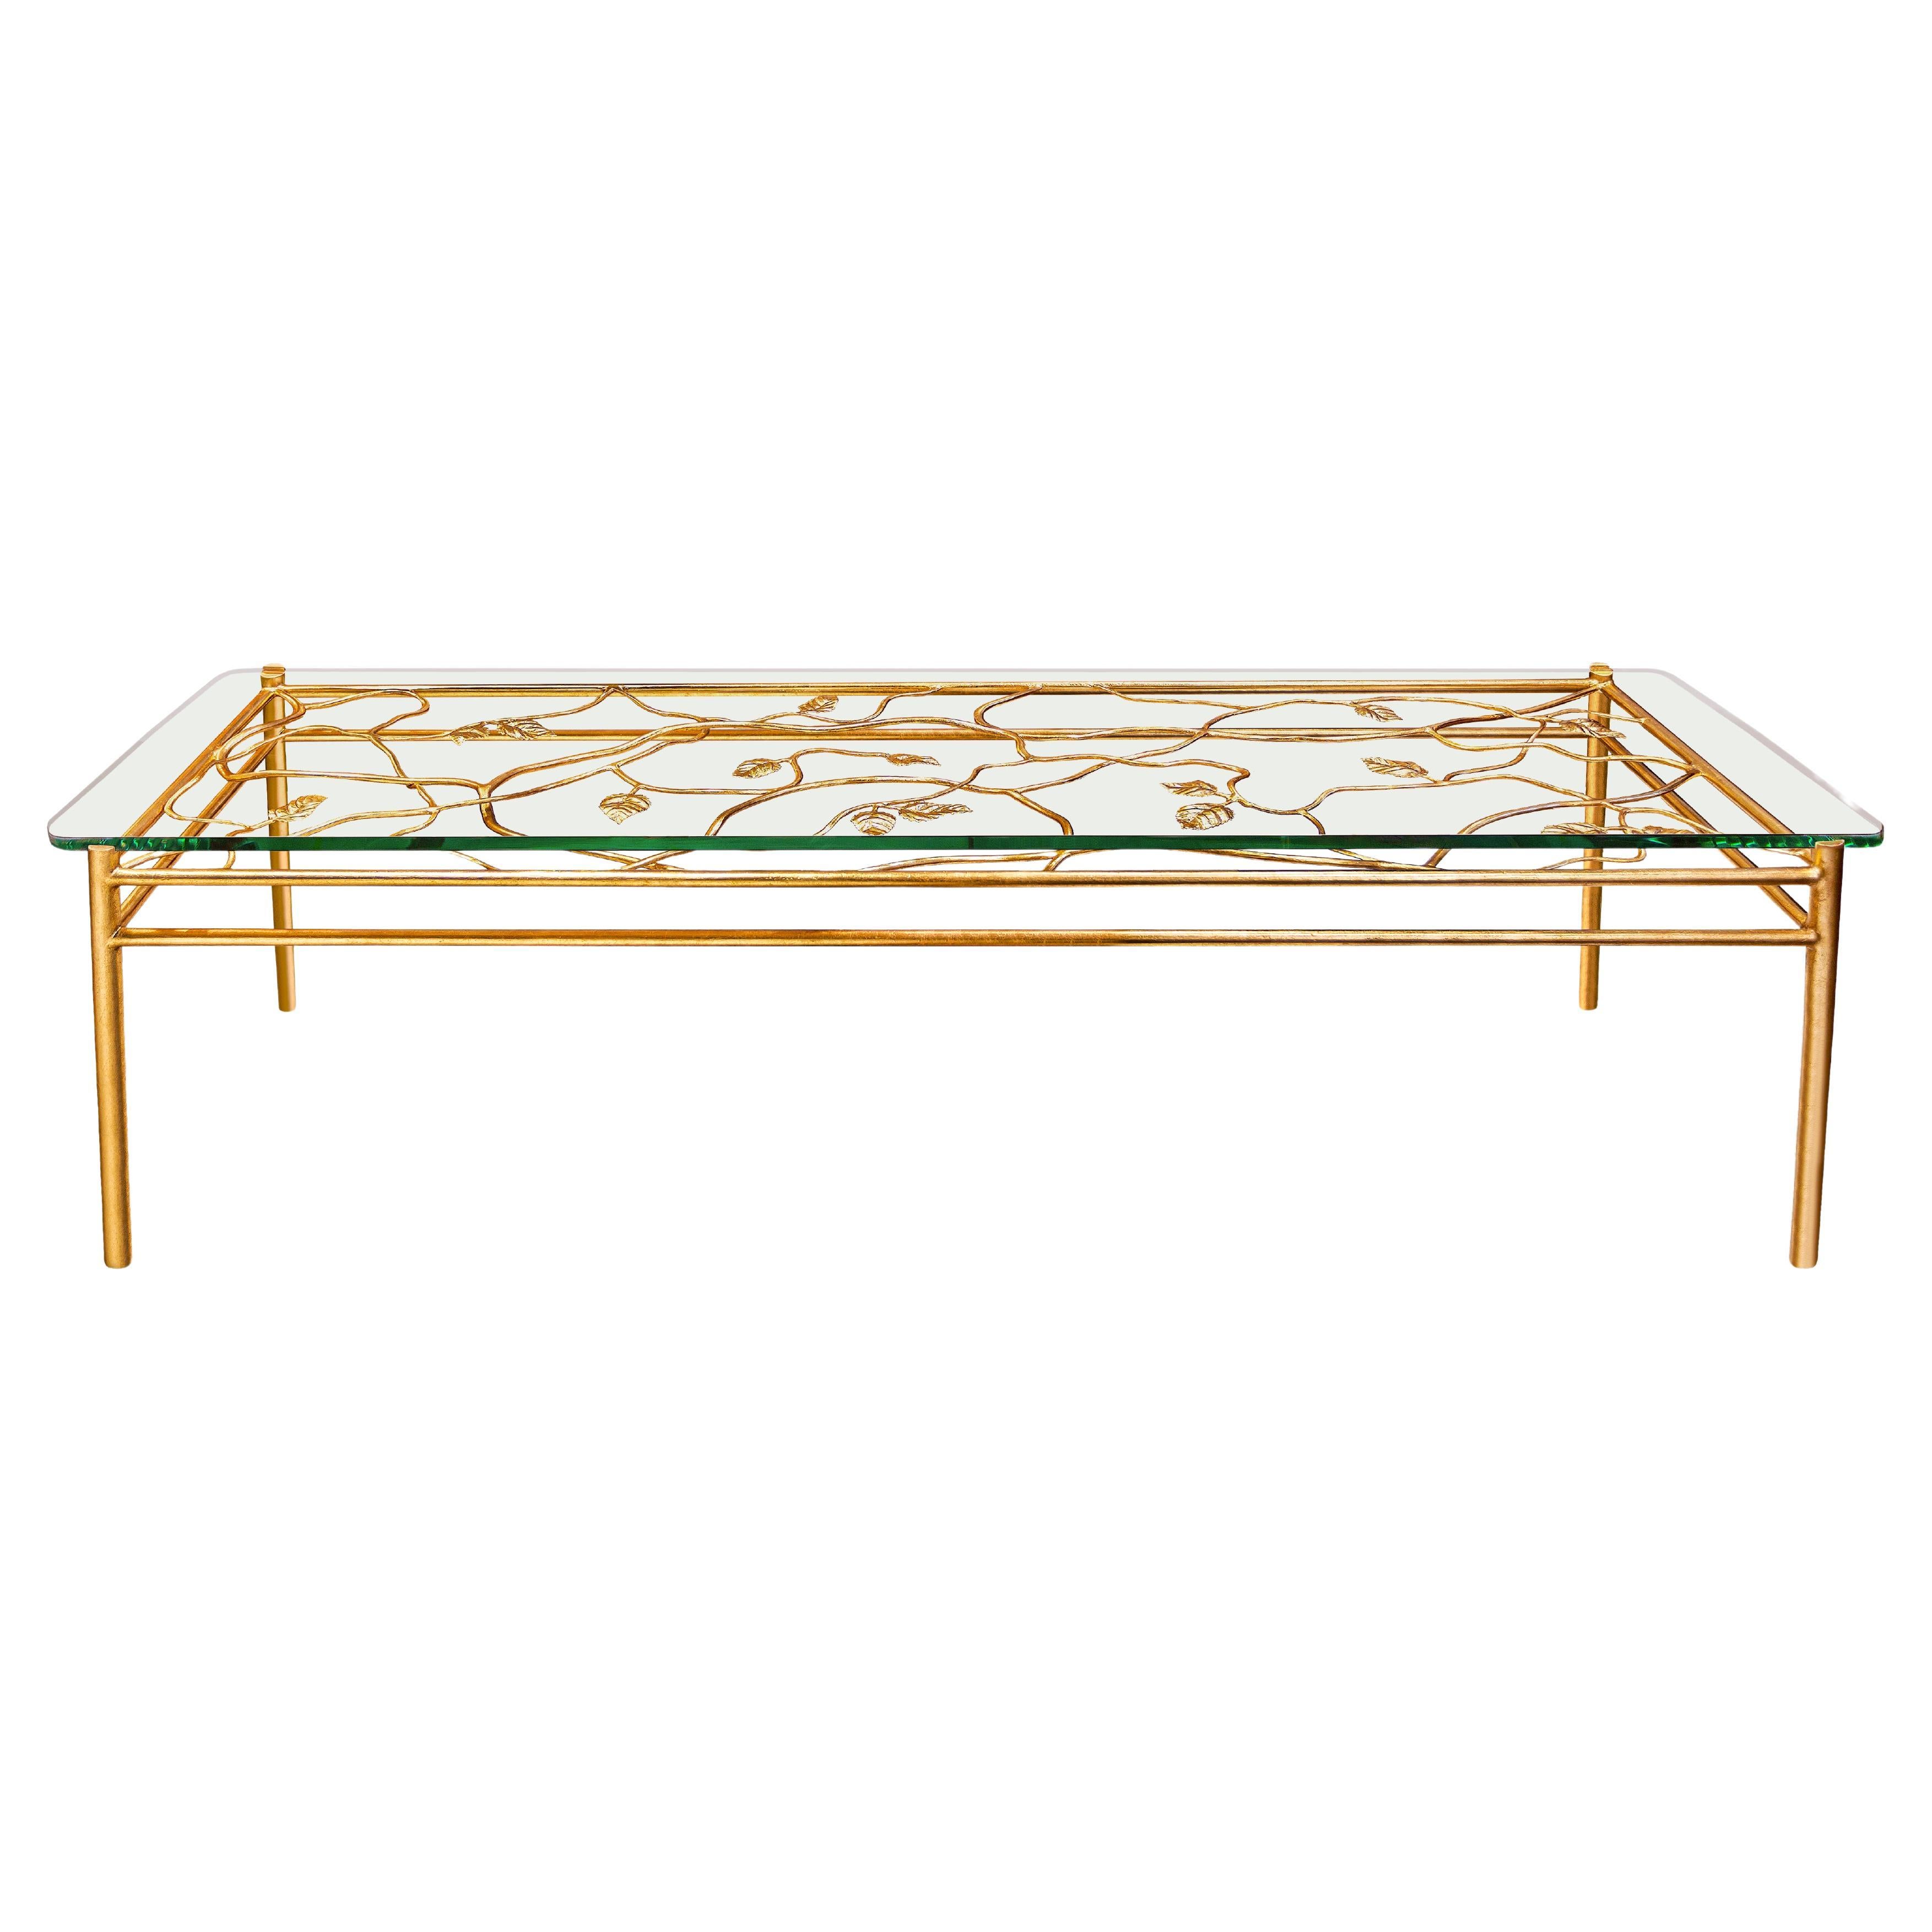 "Appian" Limited Edition Coffee Table, Antique Gold with Glass Top, Benediko